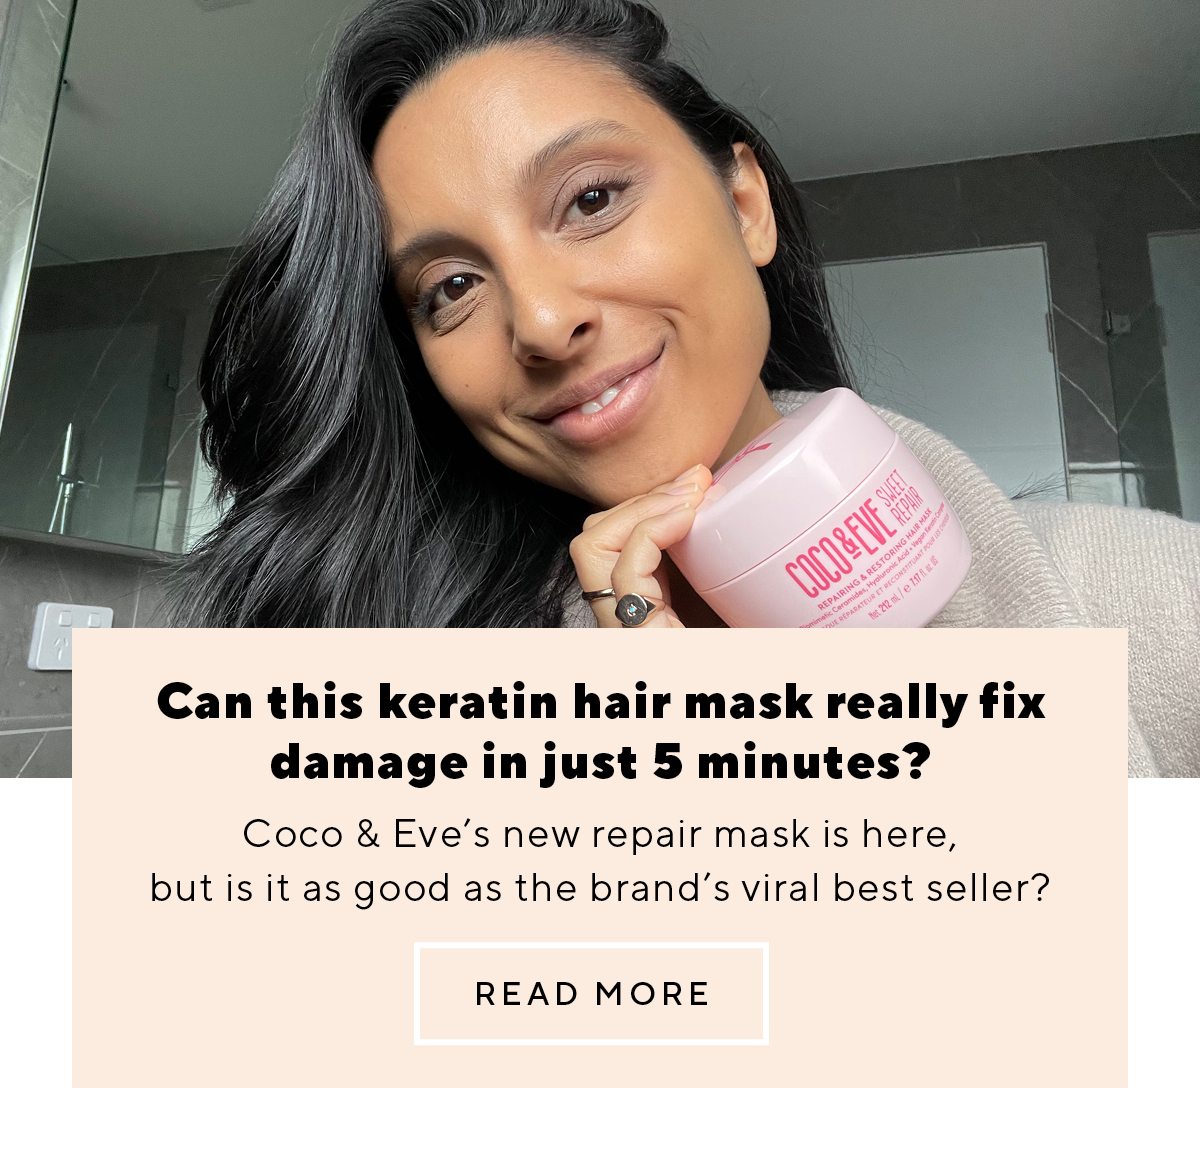 Can this keratin hair mask really fix damage in just 5 minutes?